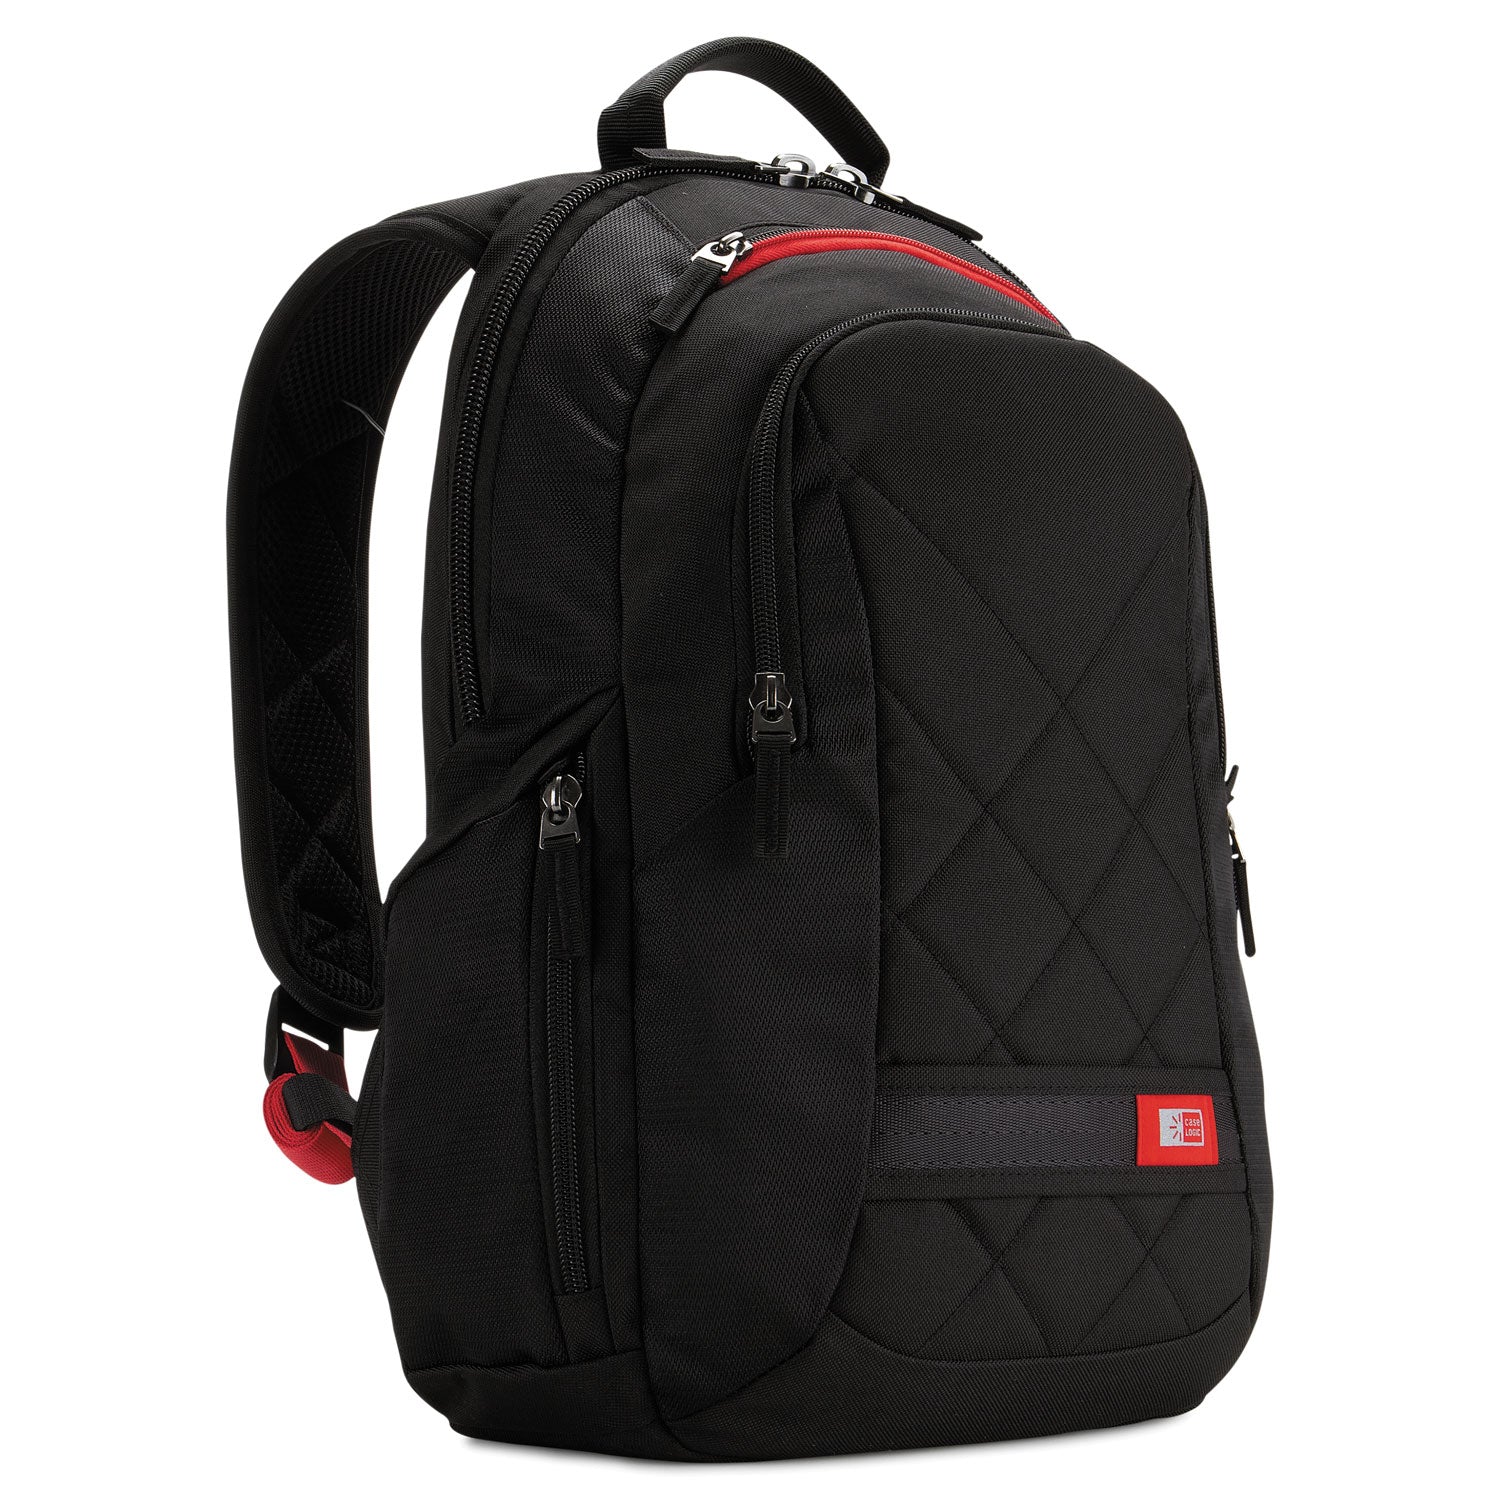 diamond-backpack-fits-devices-up-to-141-polyester-63-x-134-x-173-black_clg3201265 - 1